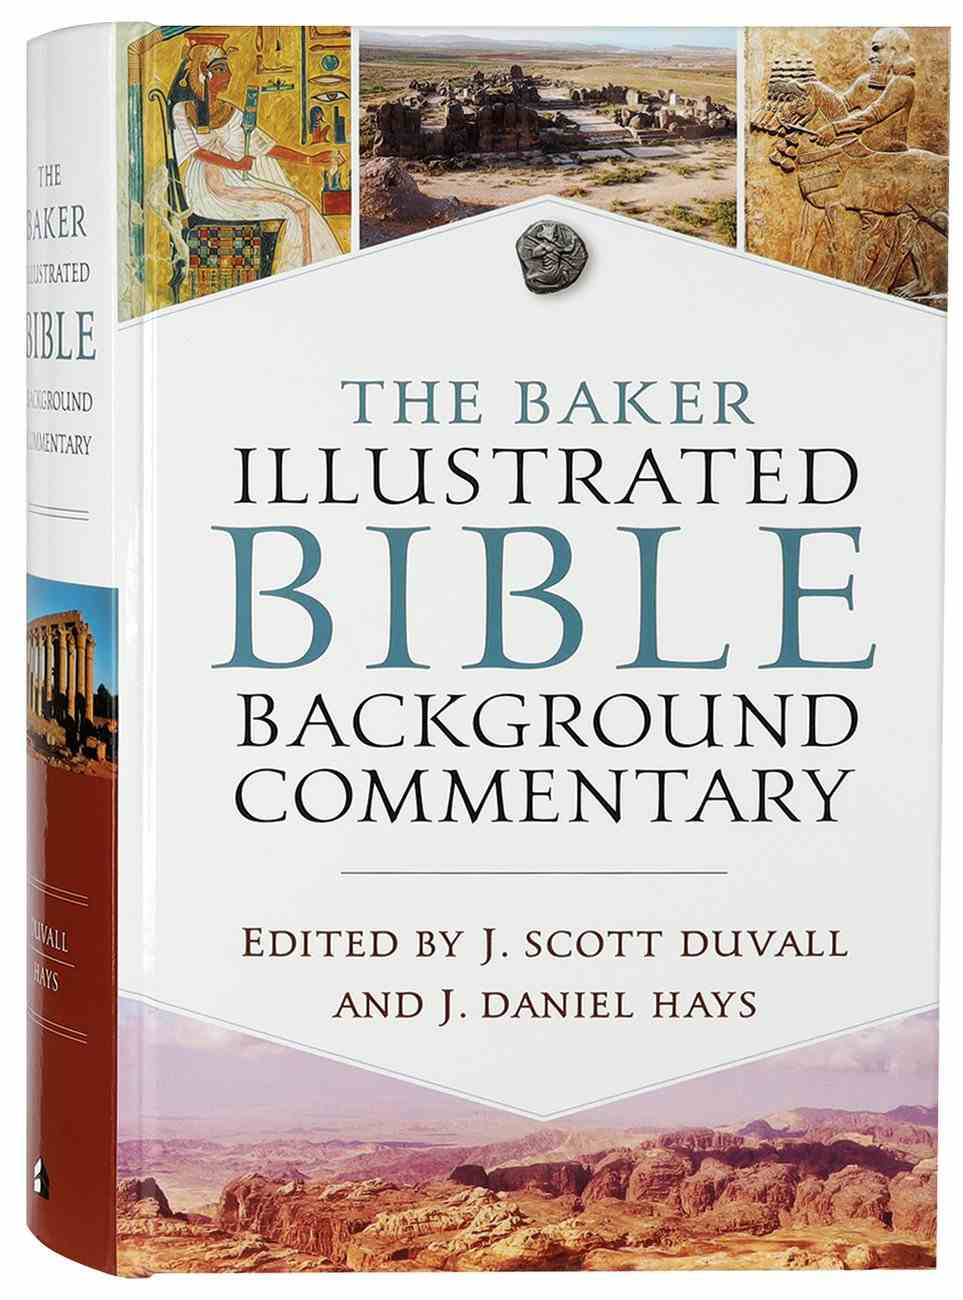 The Baker Illustrated Bible Background Commentary by J Daniel Hays ...